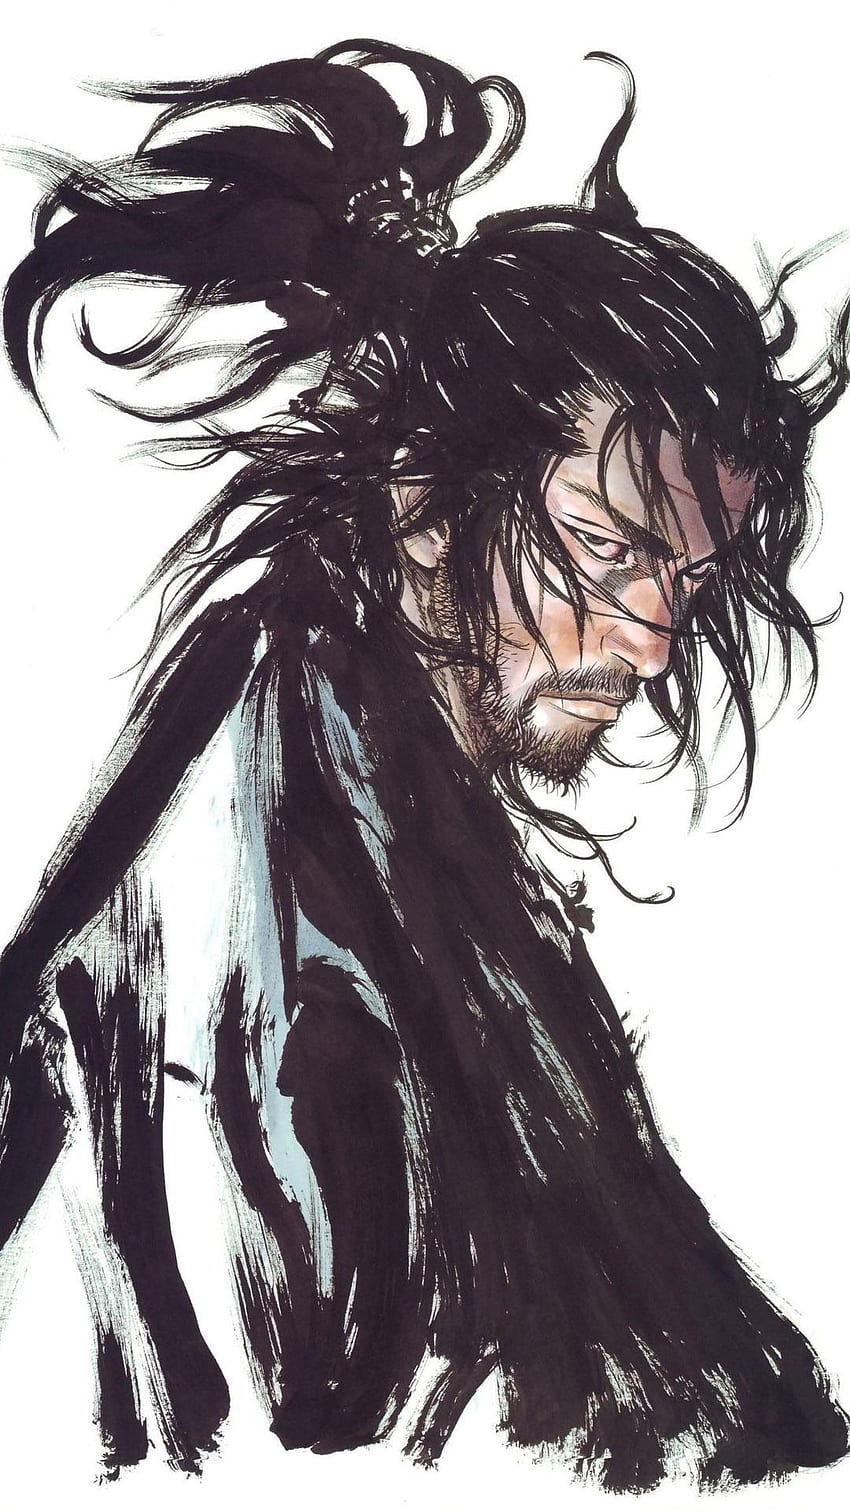 5 Reasons why Vagabond Anime will never be made